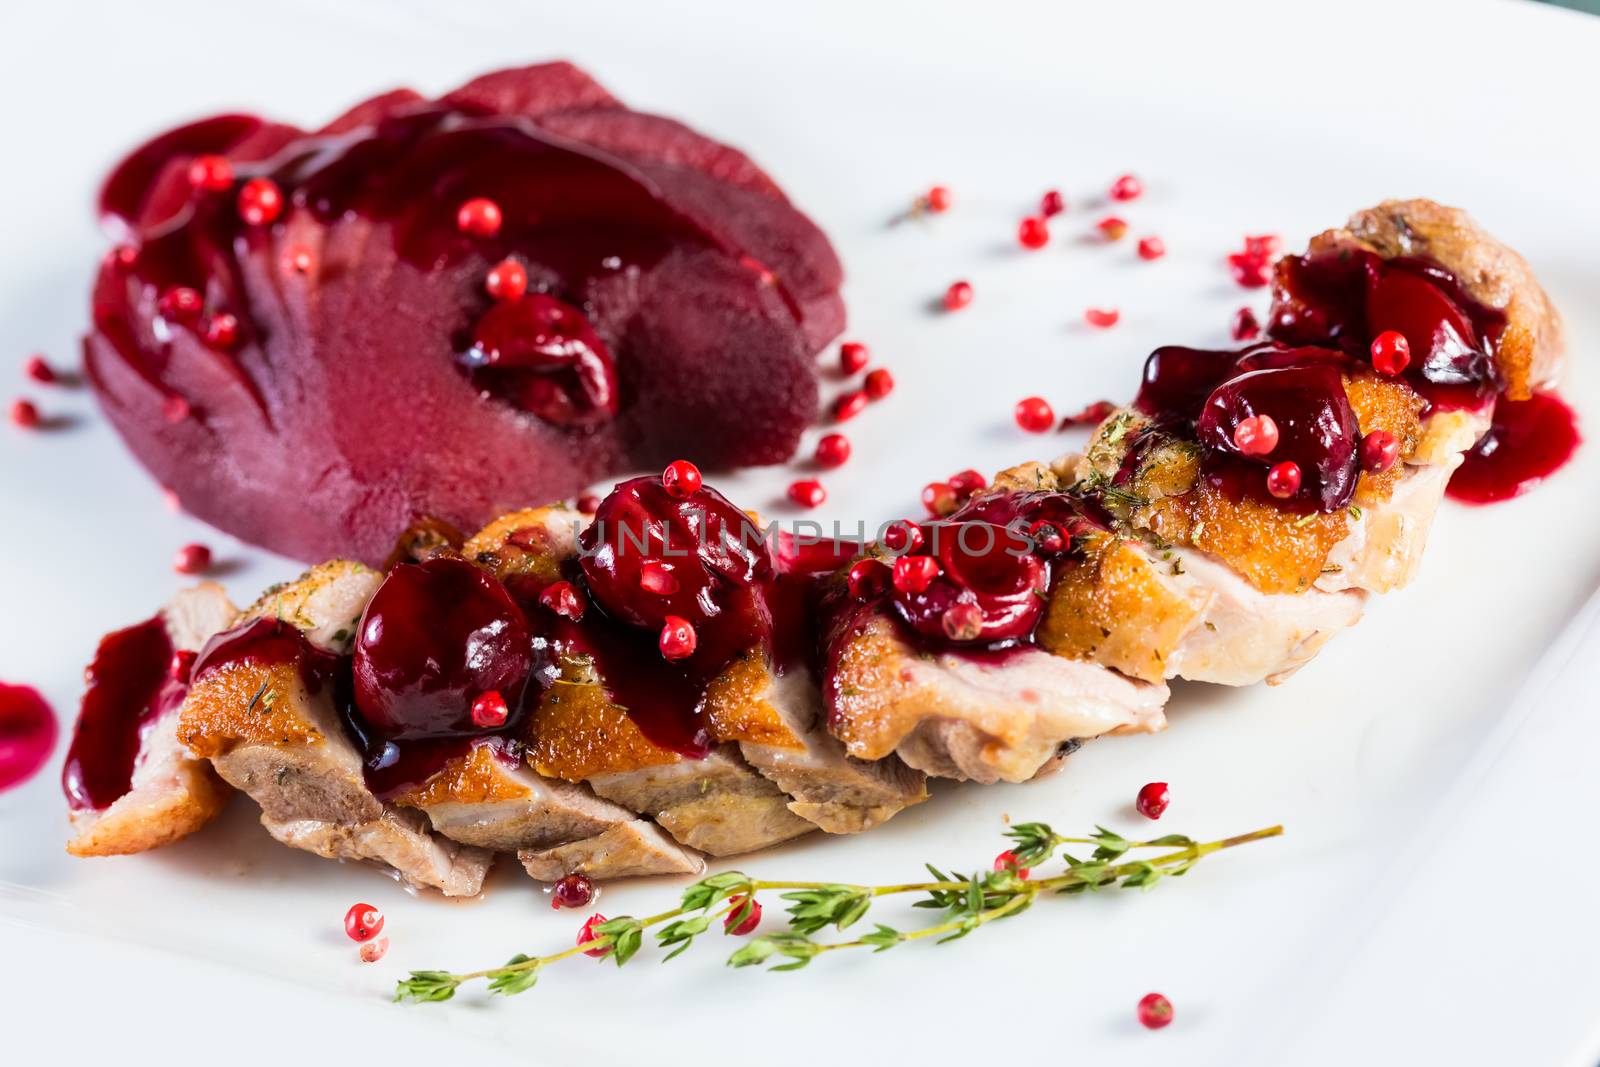 Roasted duck breast with cranberry sauce by sarymsakov